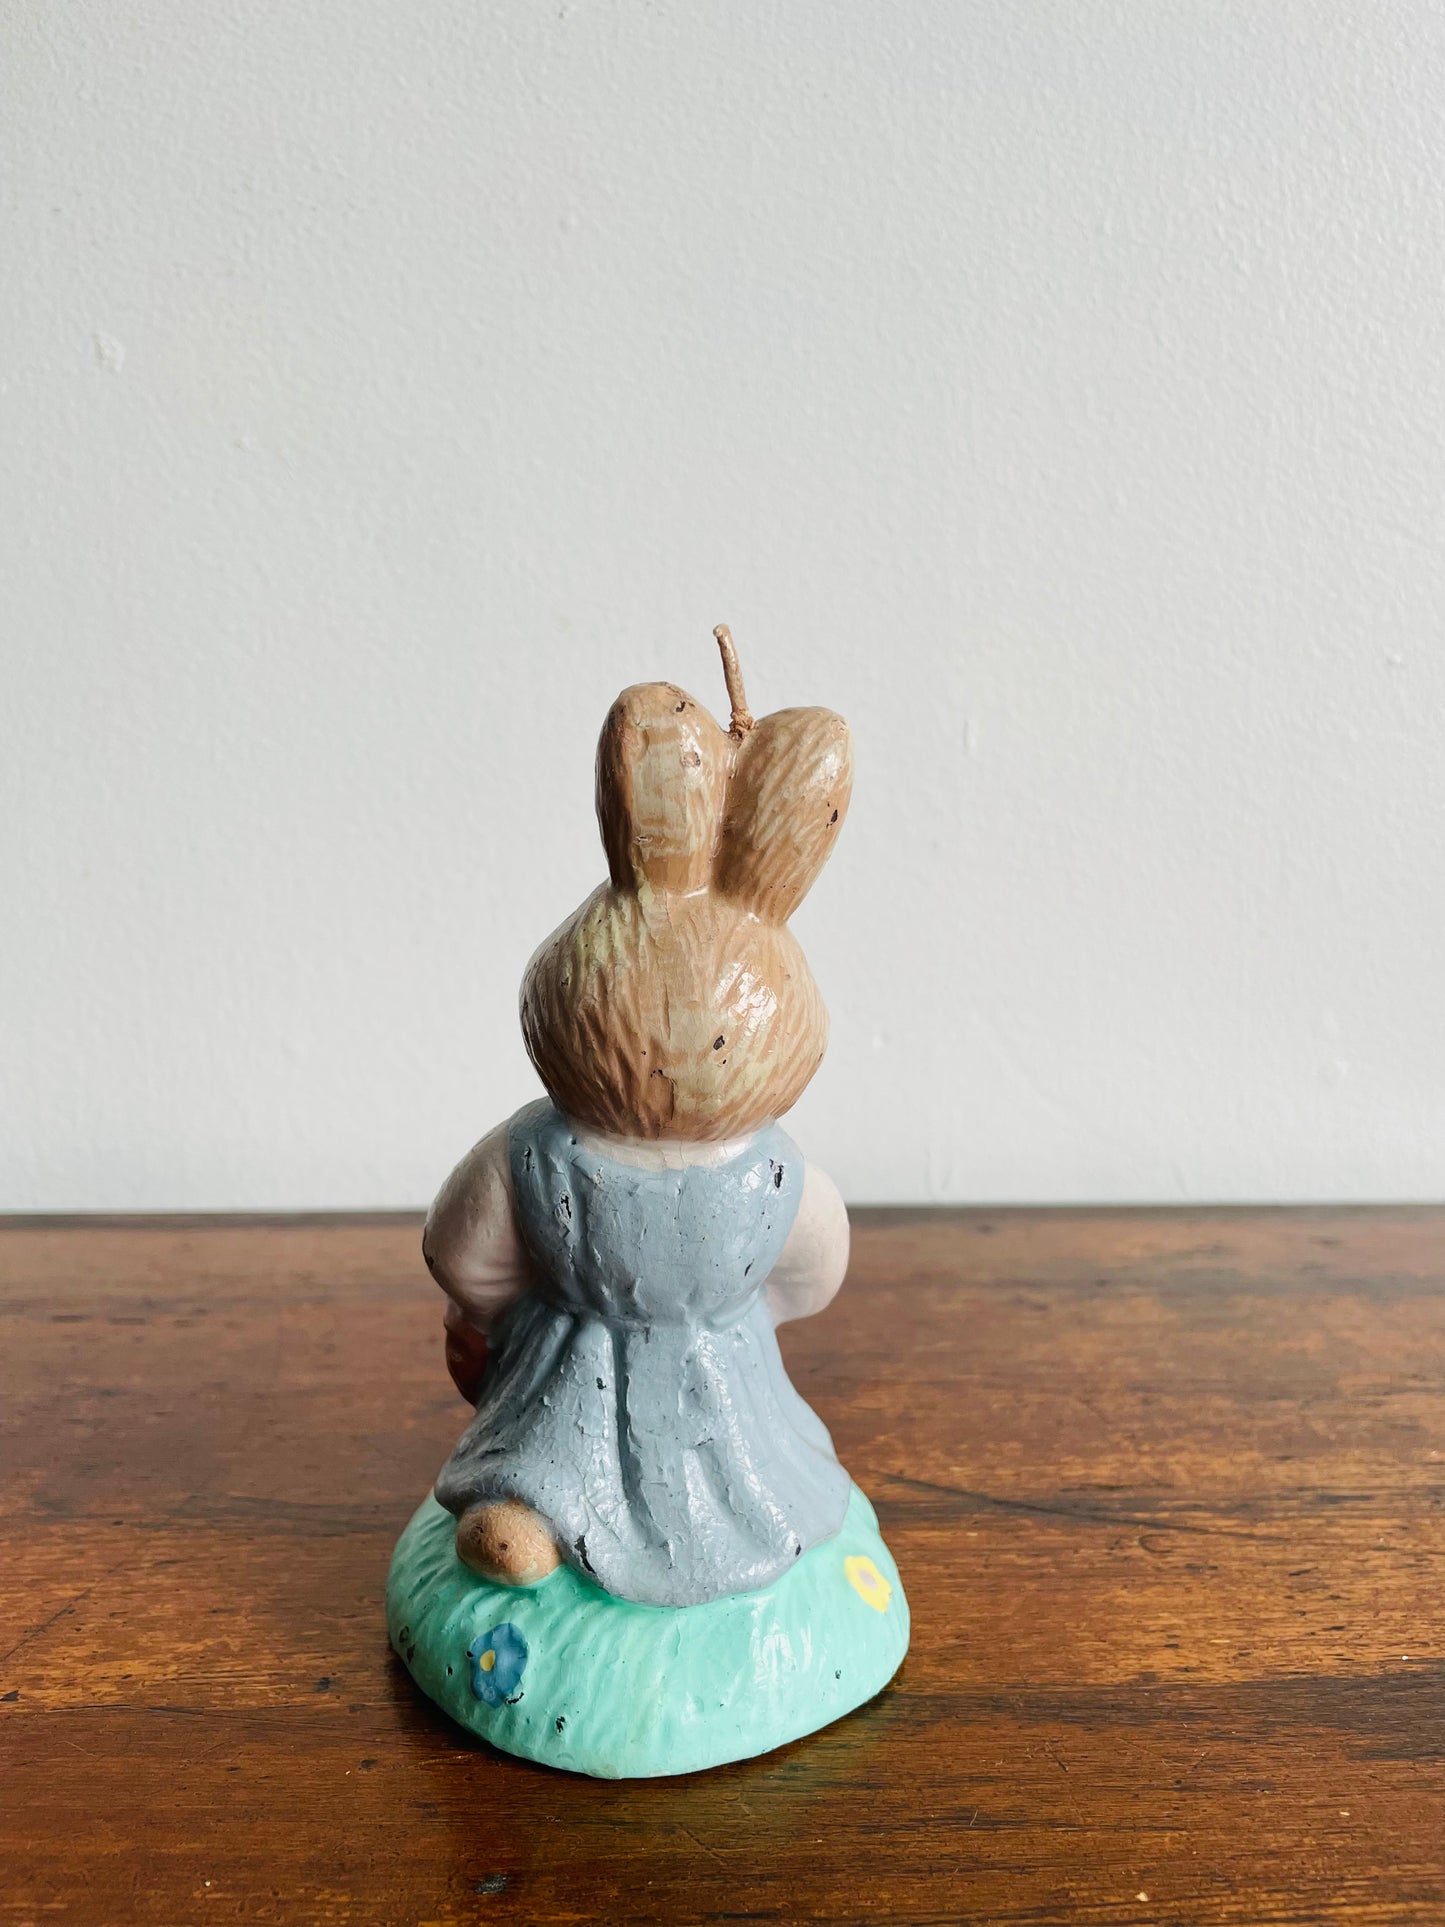 Easter Bunny Candle